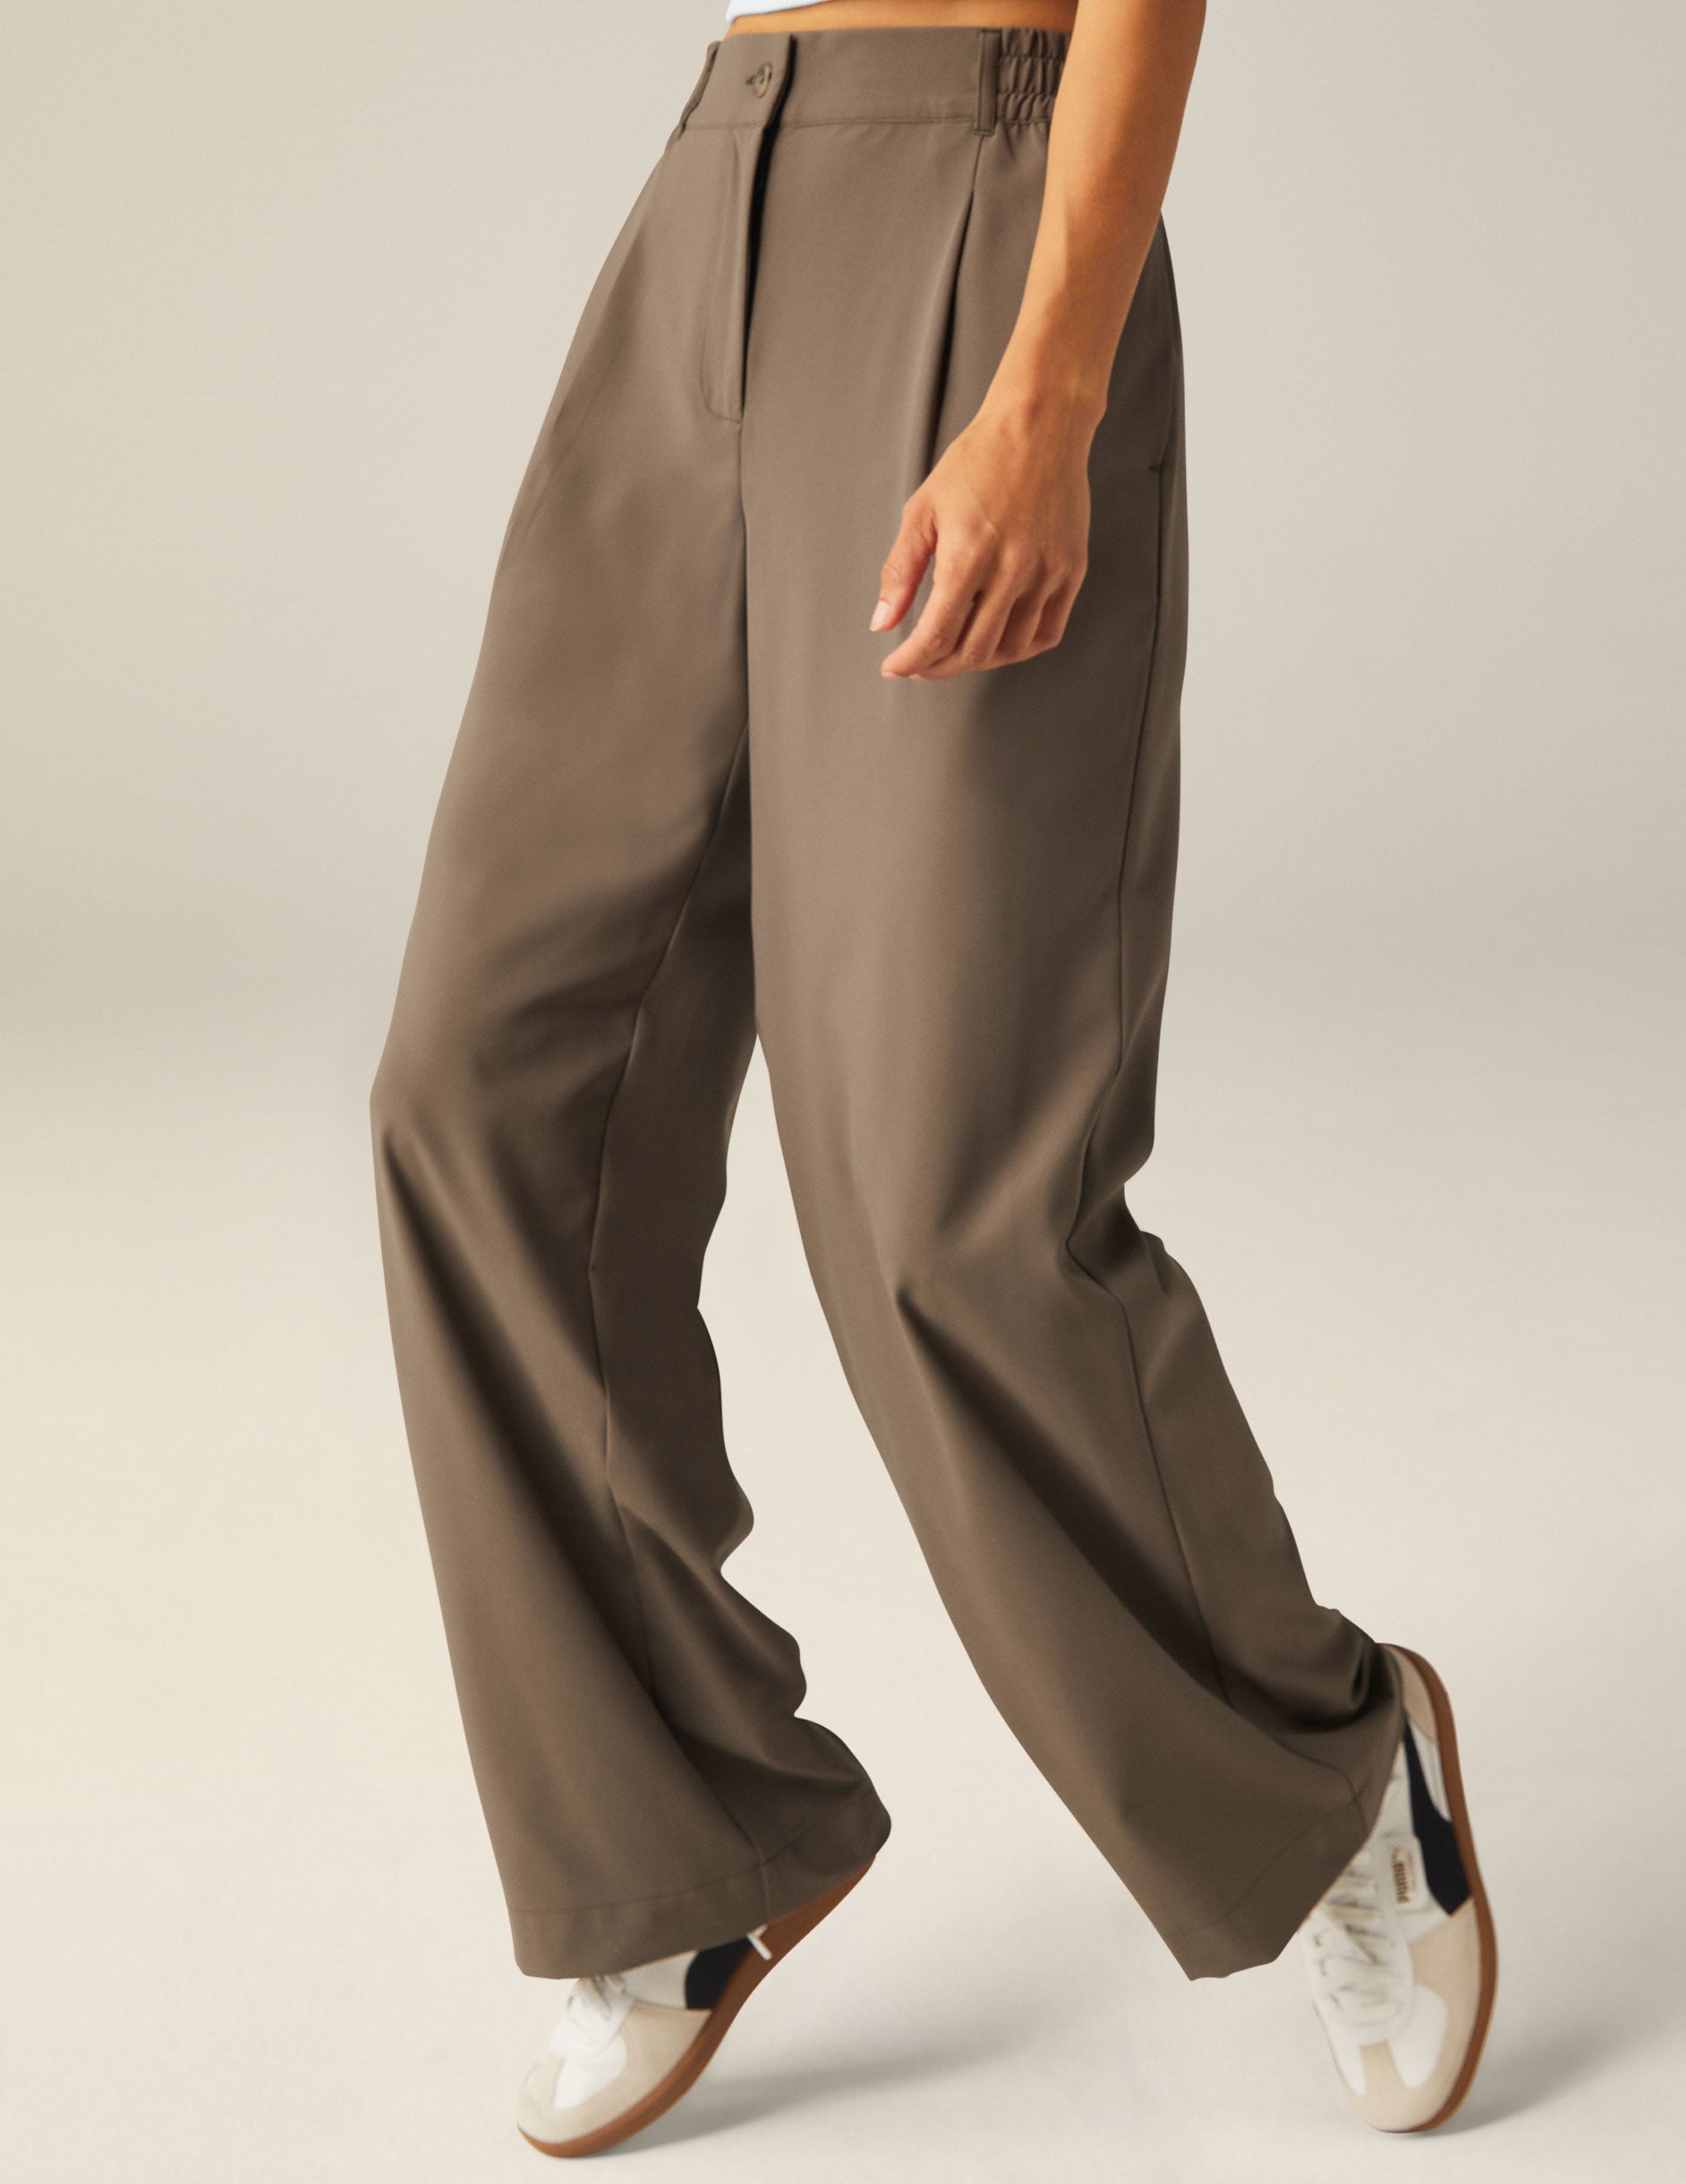 brown mid rise jetstretch woven pants with cargo style pockets. 